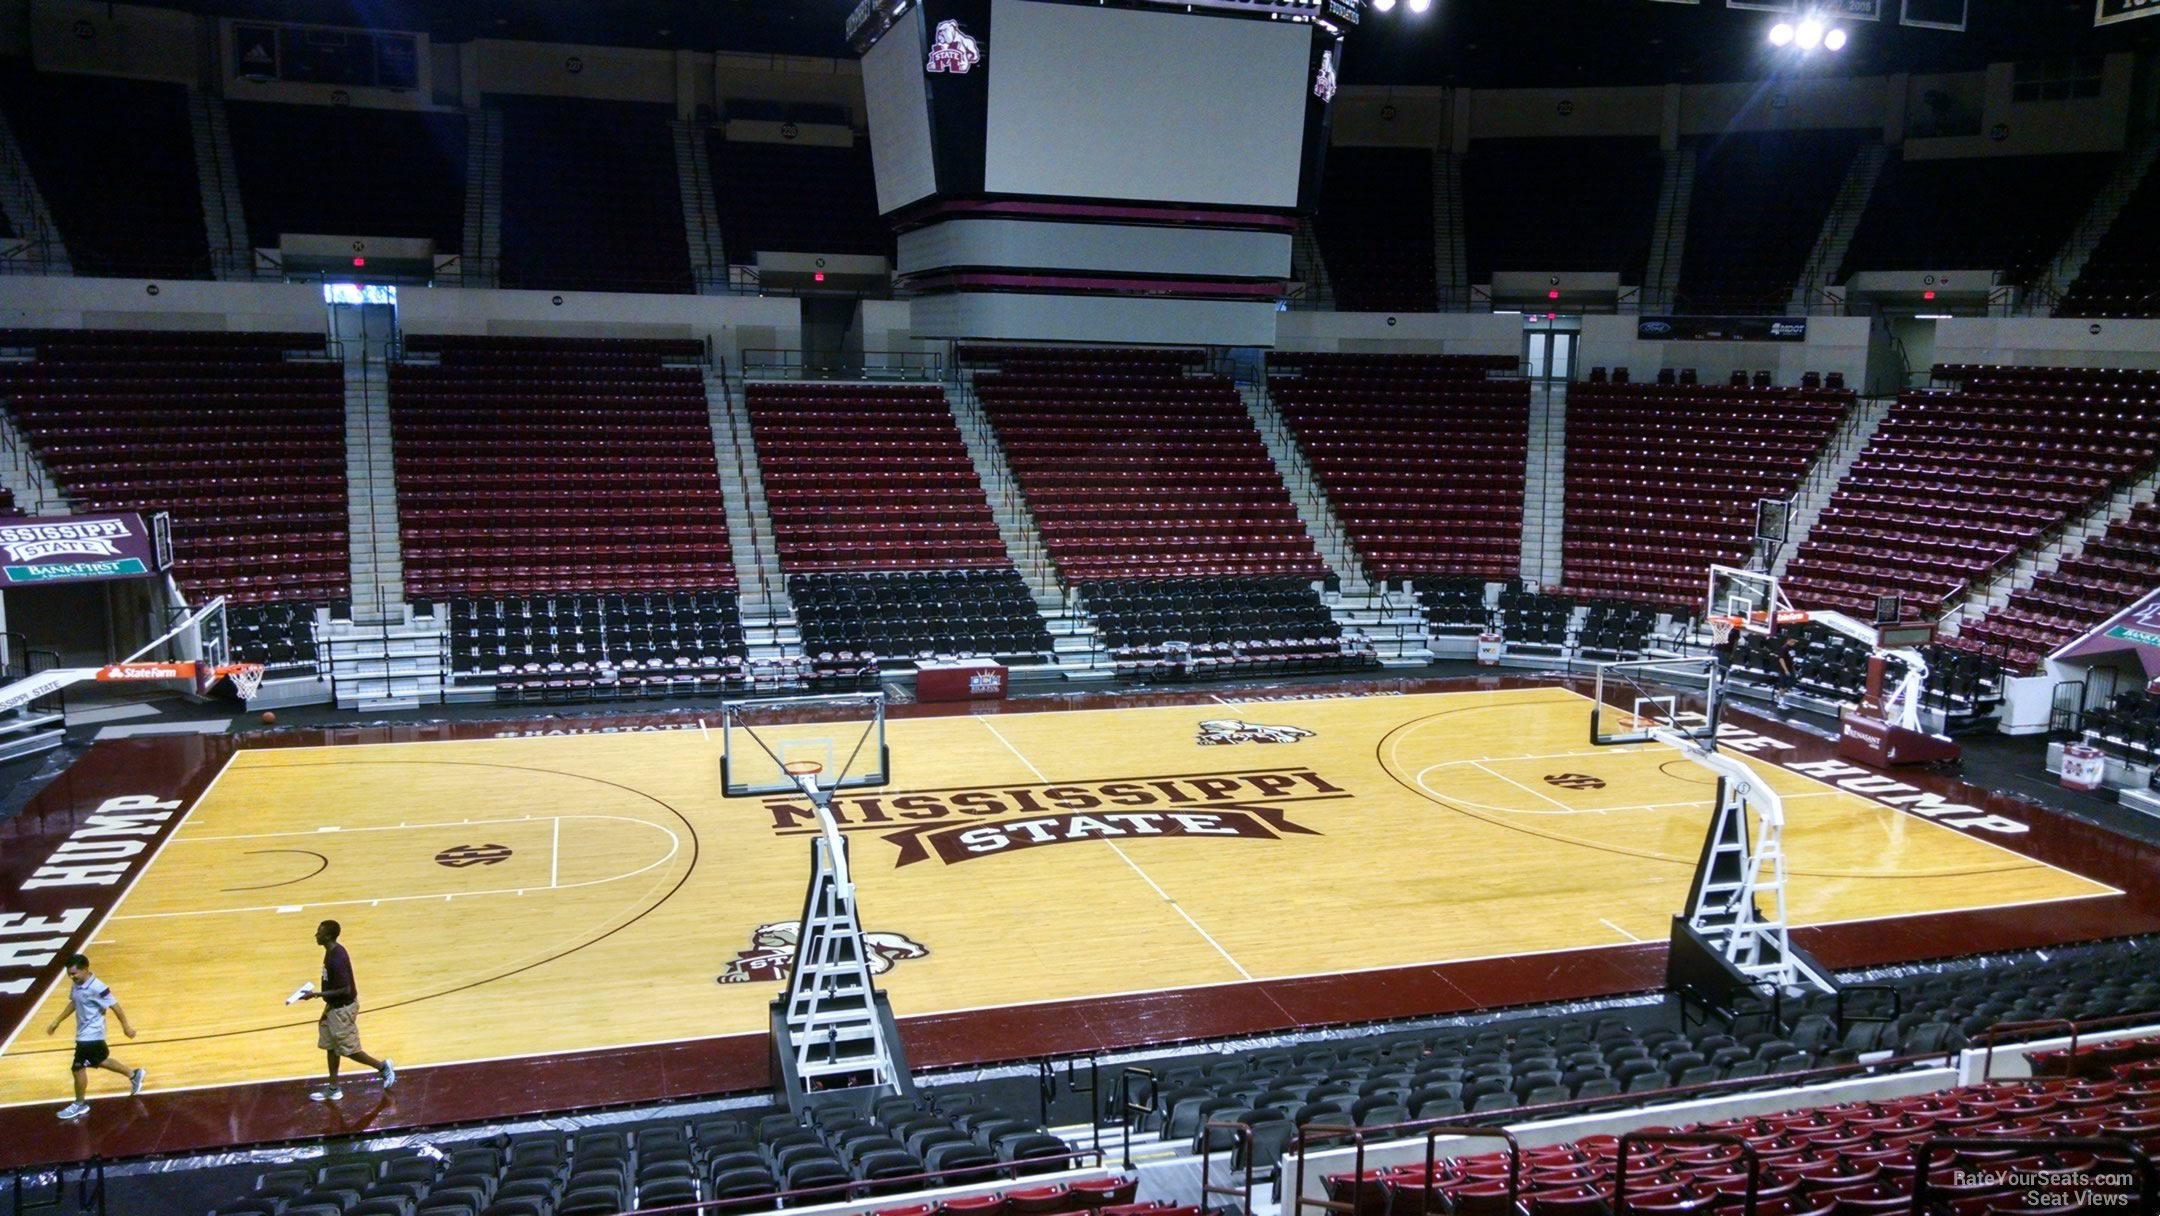 section 107, row 15 seat view  - humphrey coliseum